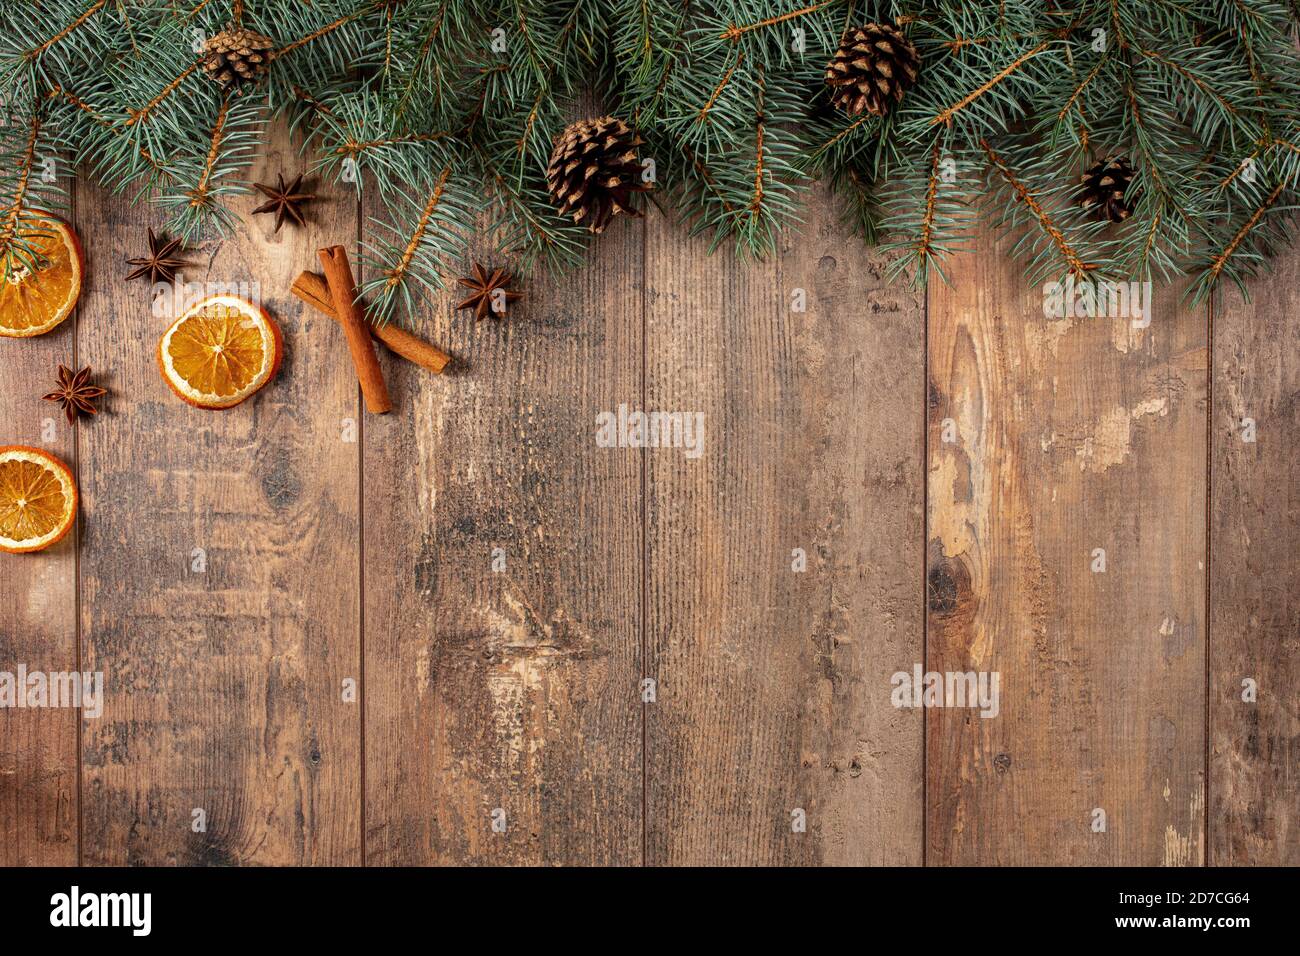 Christmas holiday border with evergreen branches on rustic cedar wooden  boards Stock Photo - Alamy